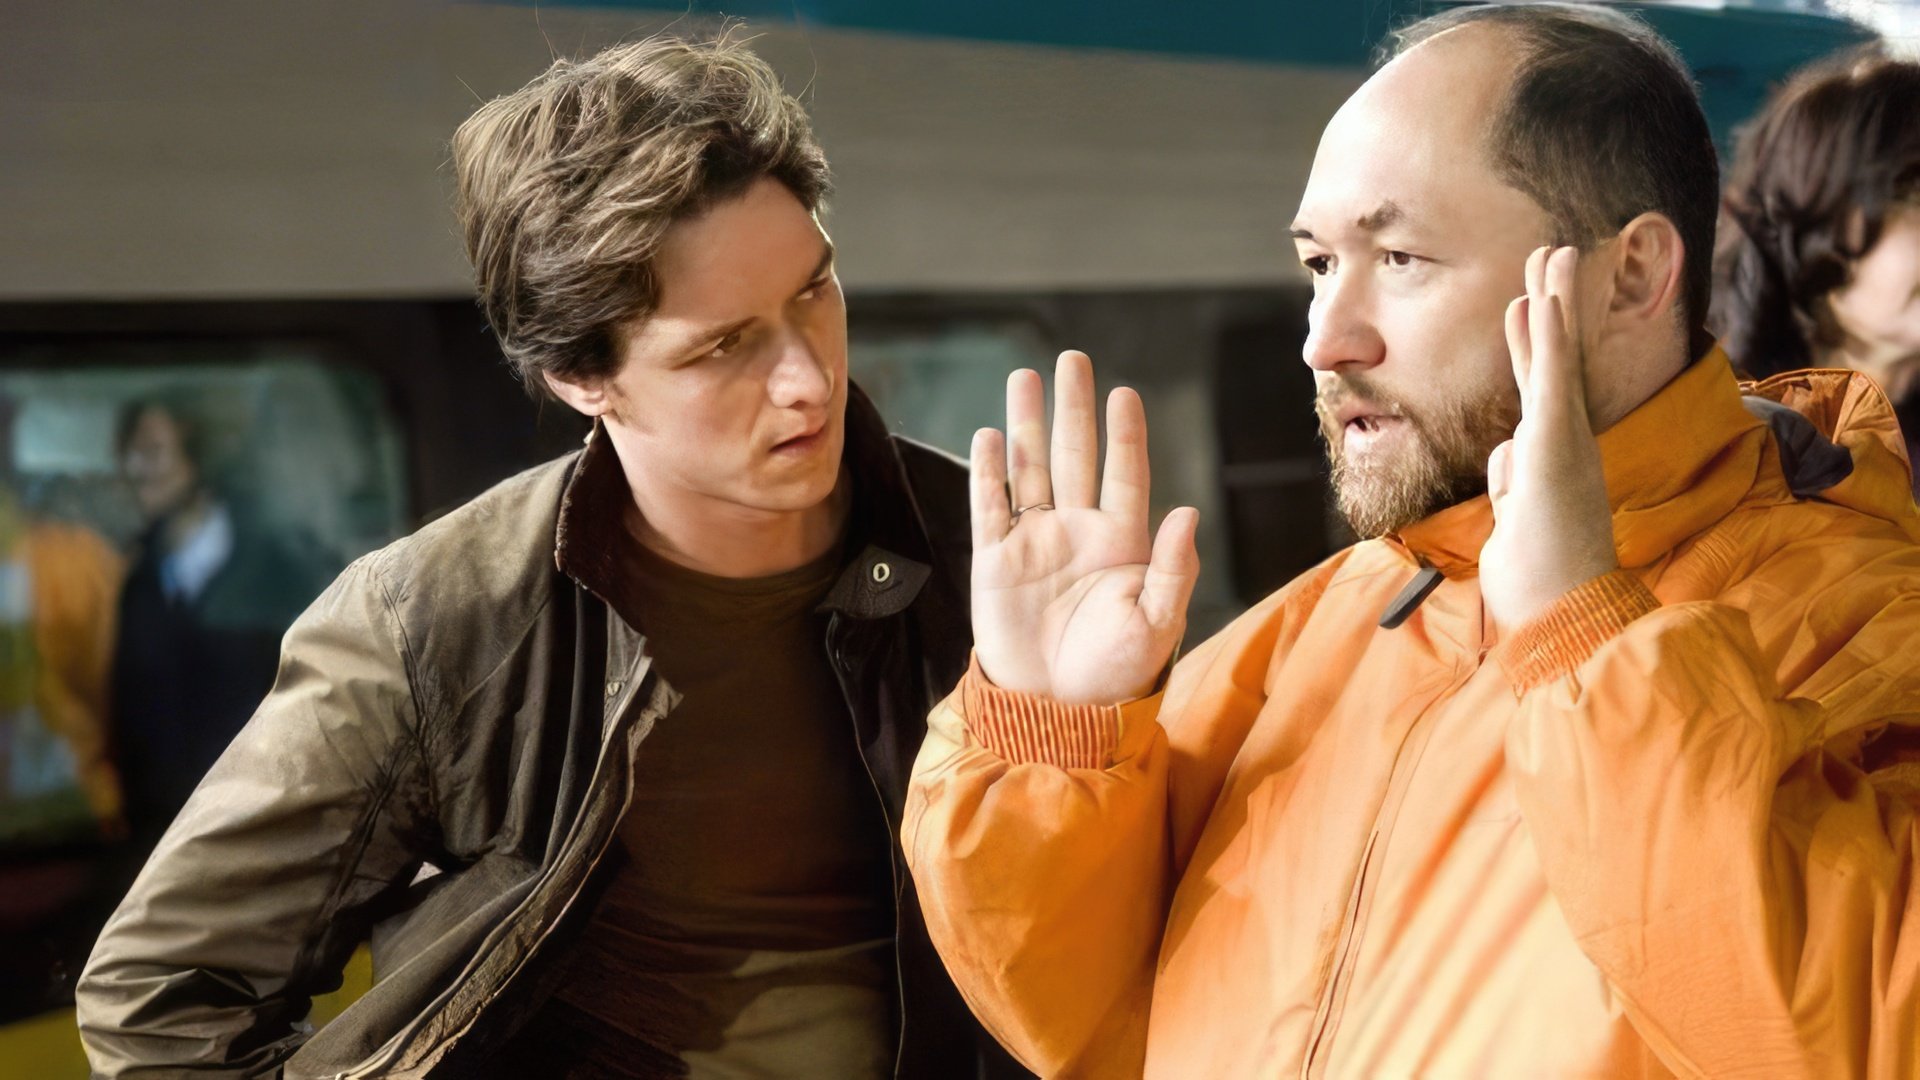 McAvoy worked with Bekmambetov in the «Wanted» action thriller